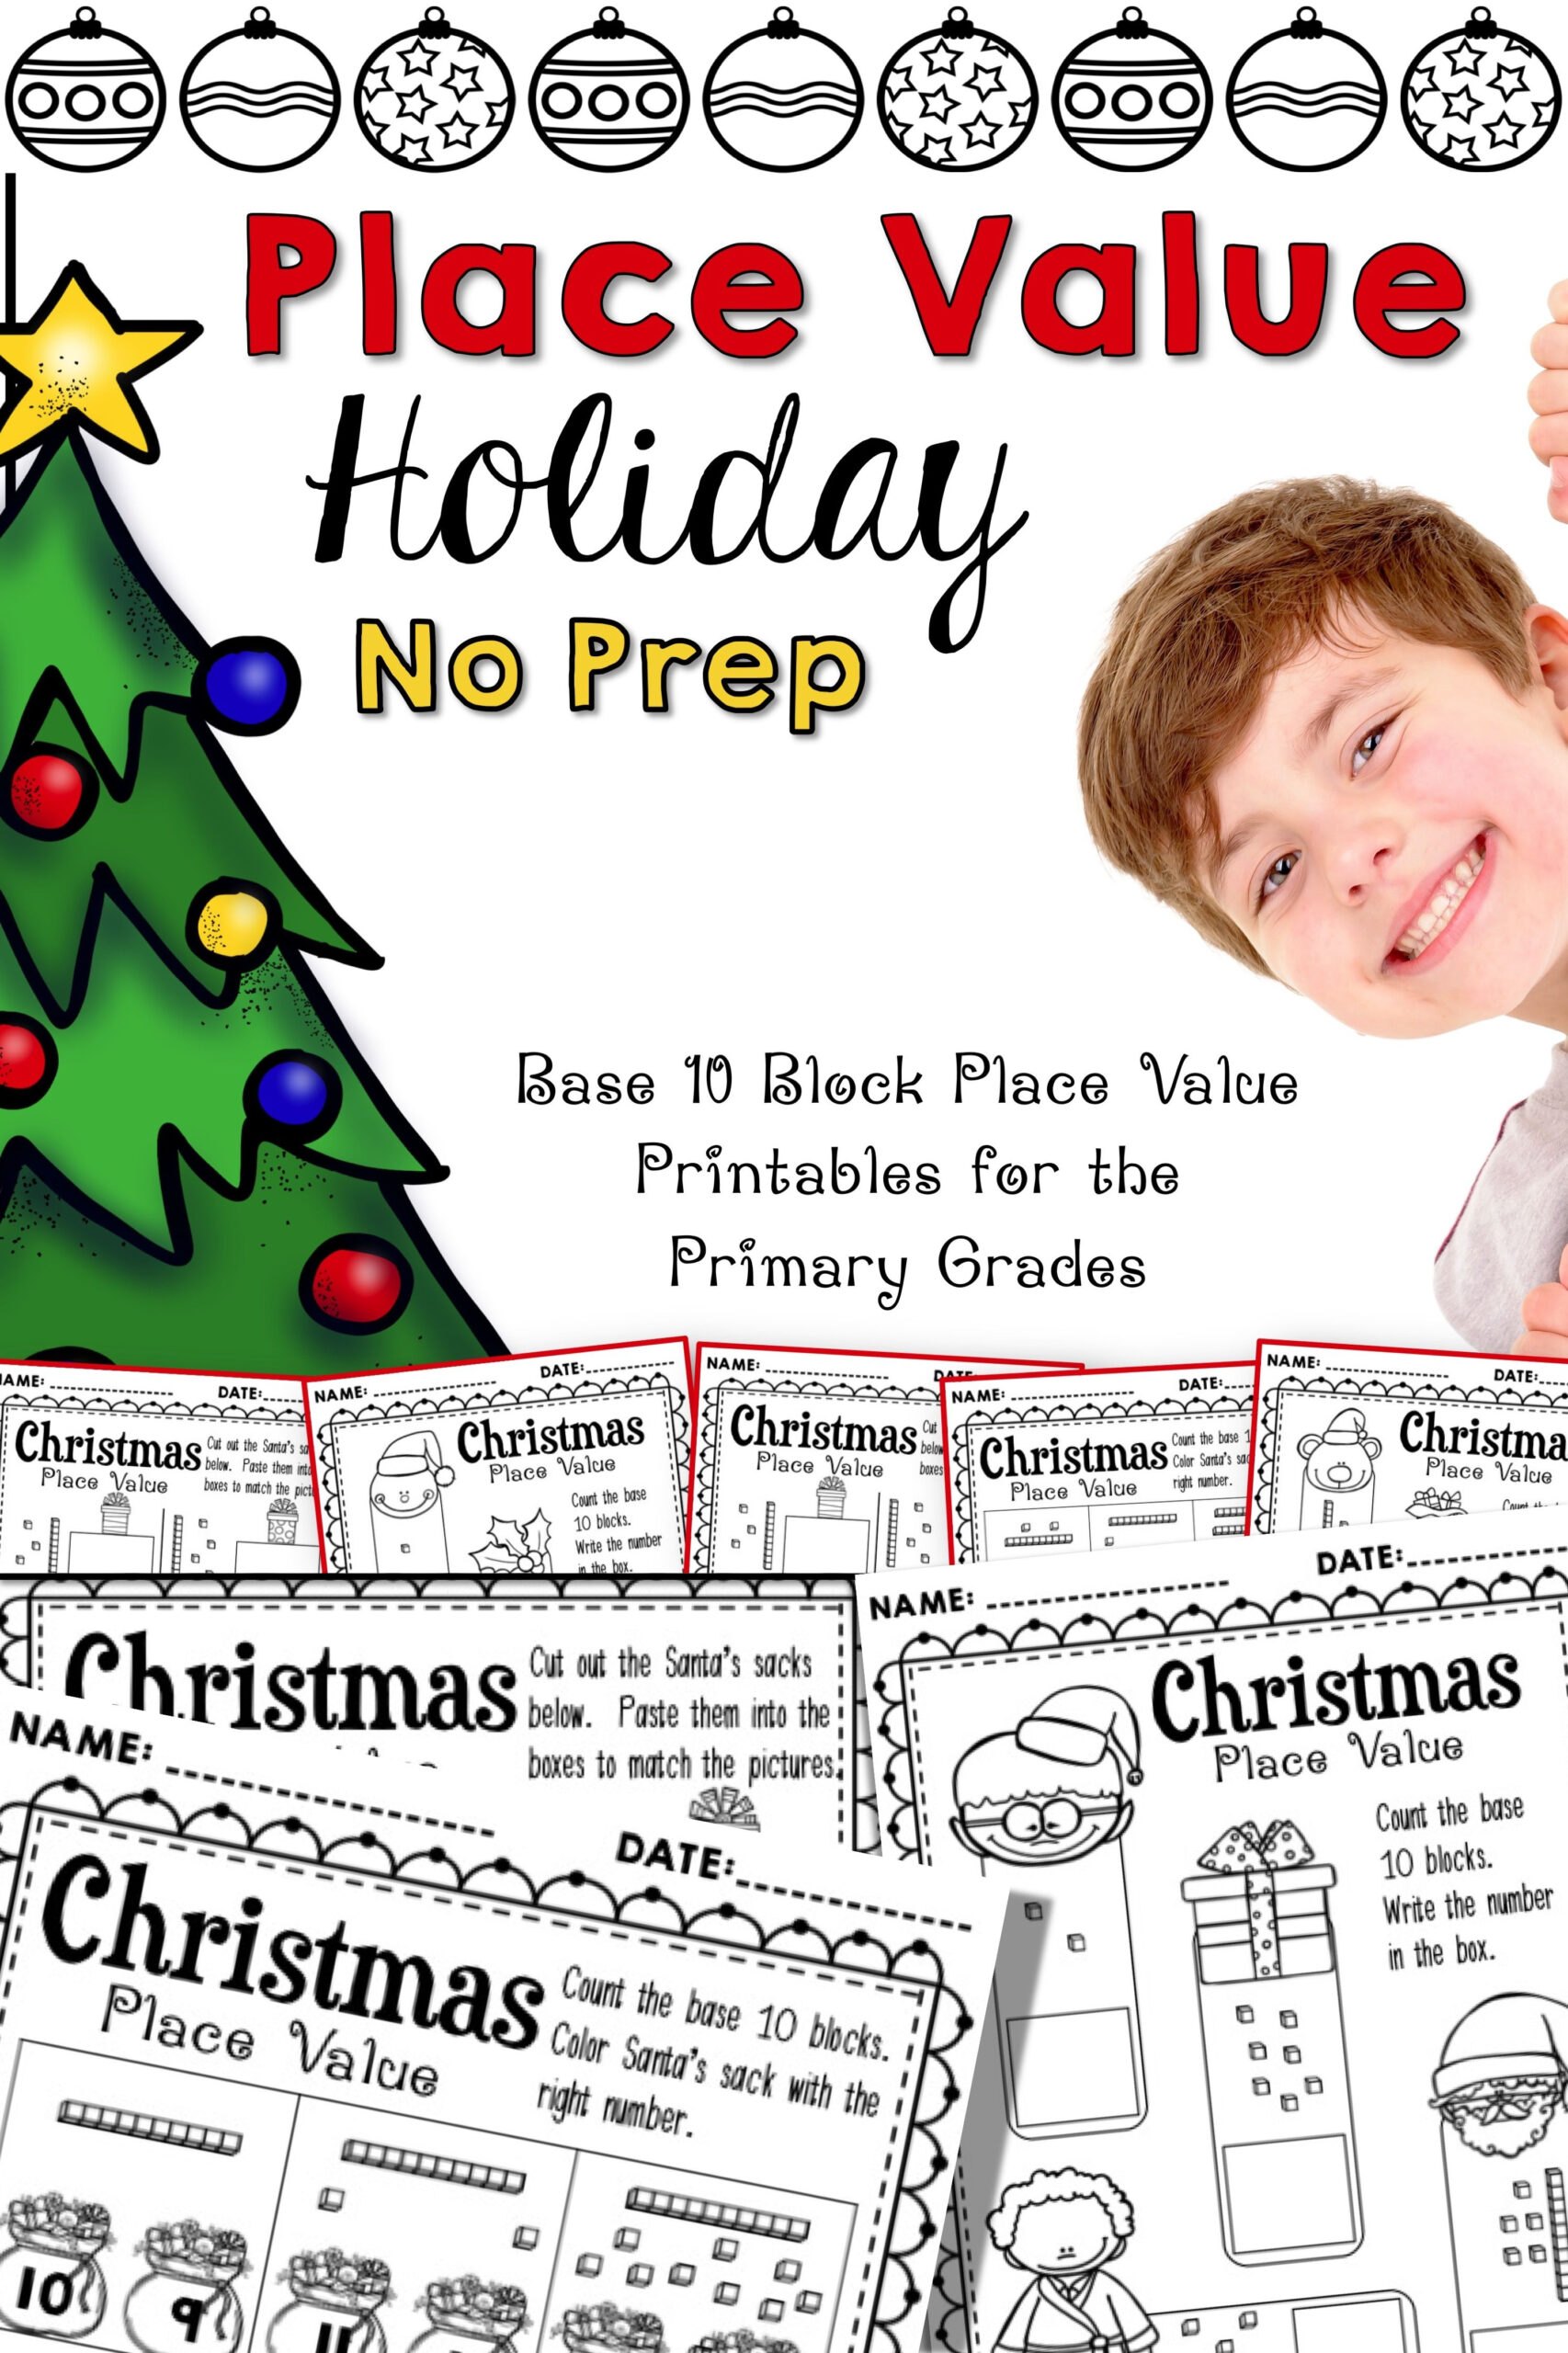 Christmas Place Value ~ Base 10 Blocks Comes With 10 Festive